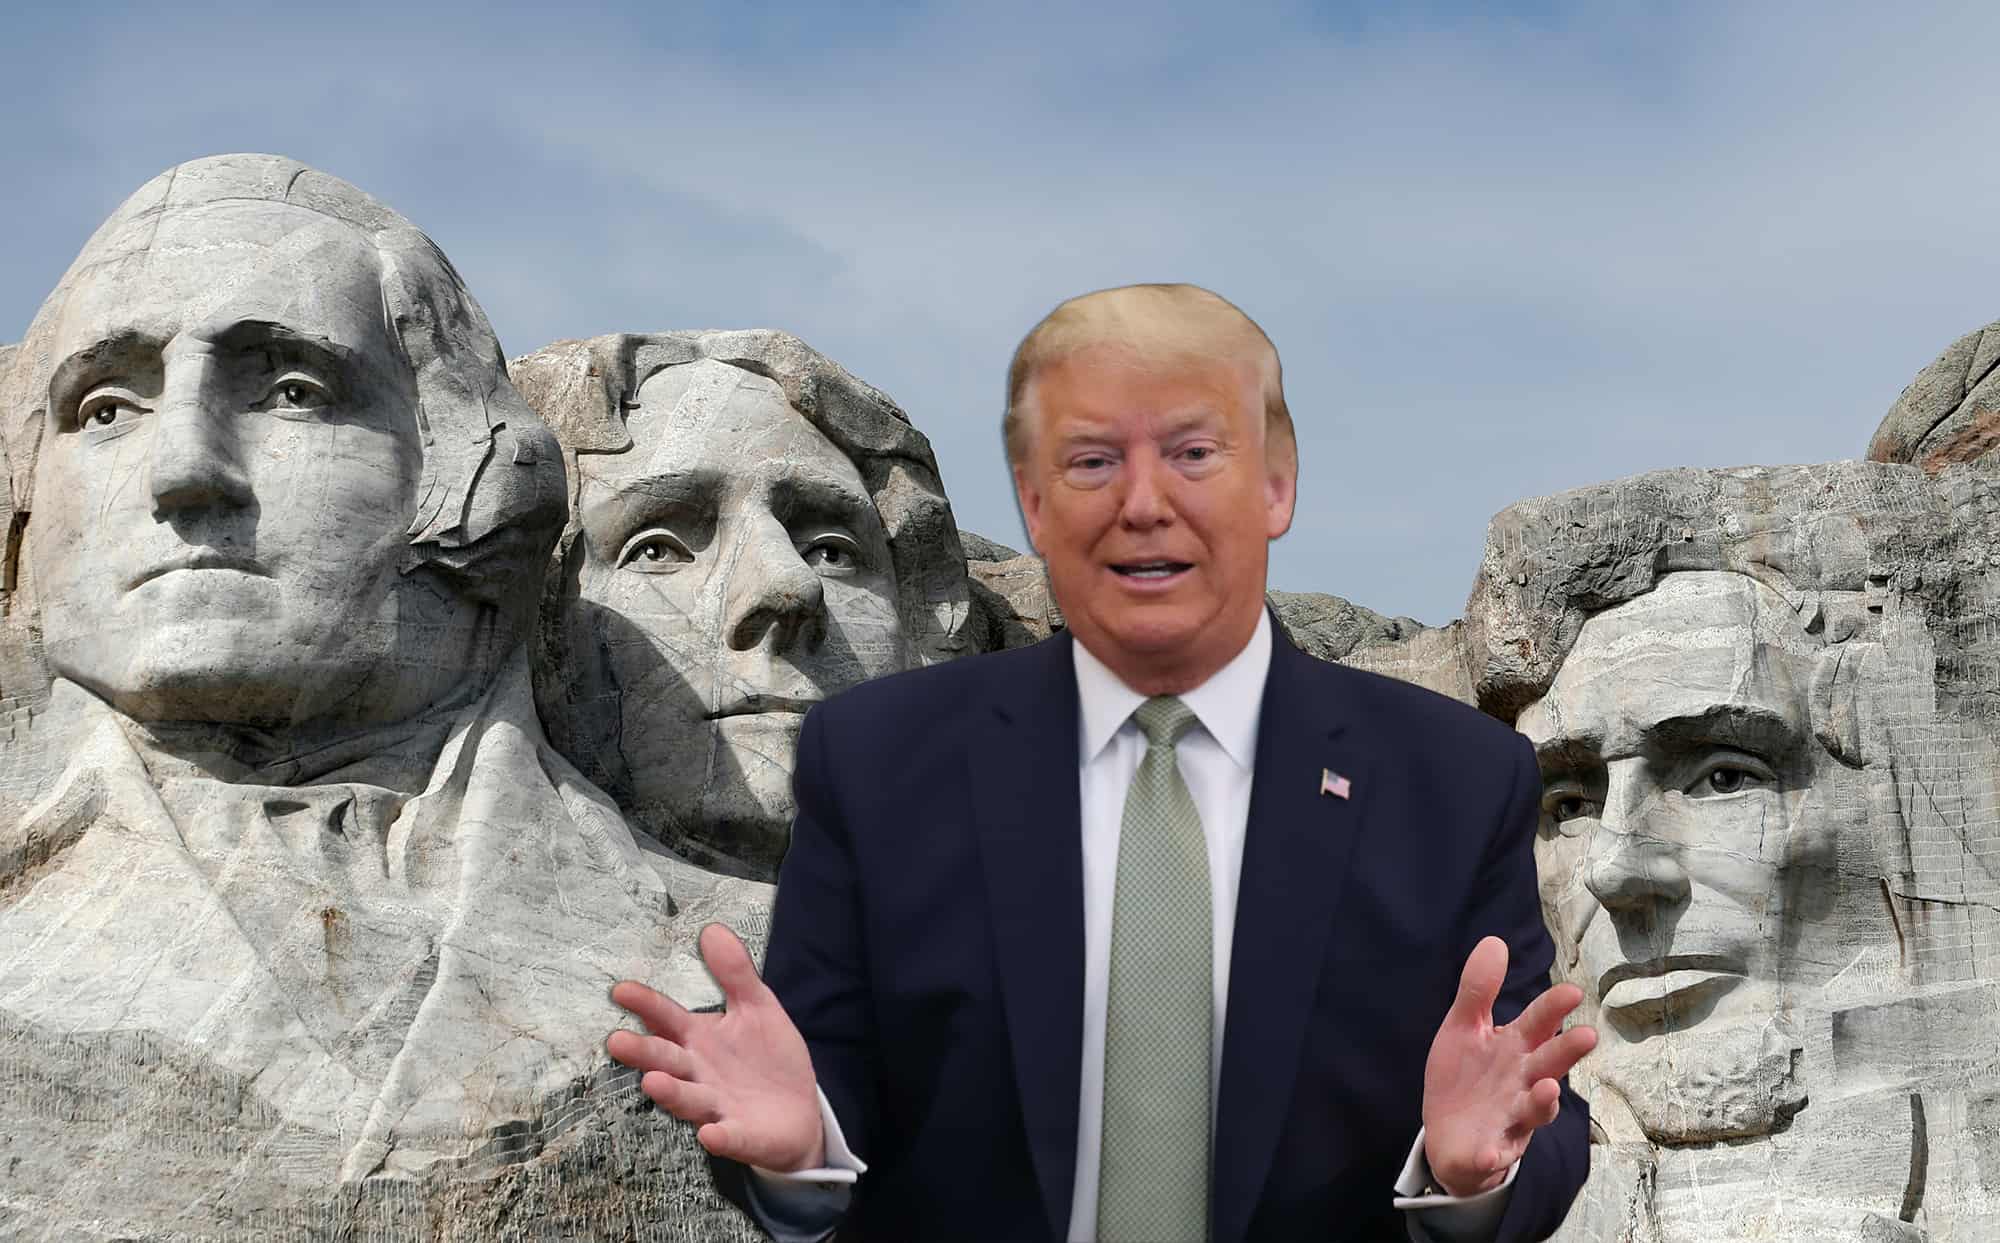 White House inquired about adding Donald Trump’s face to Mount Rushmore